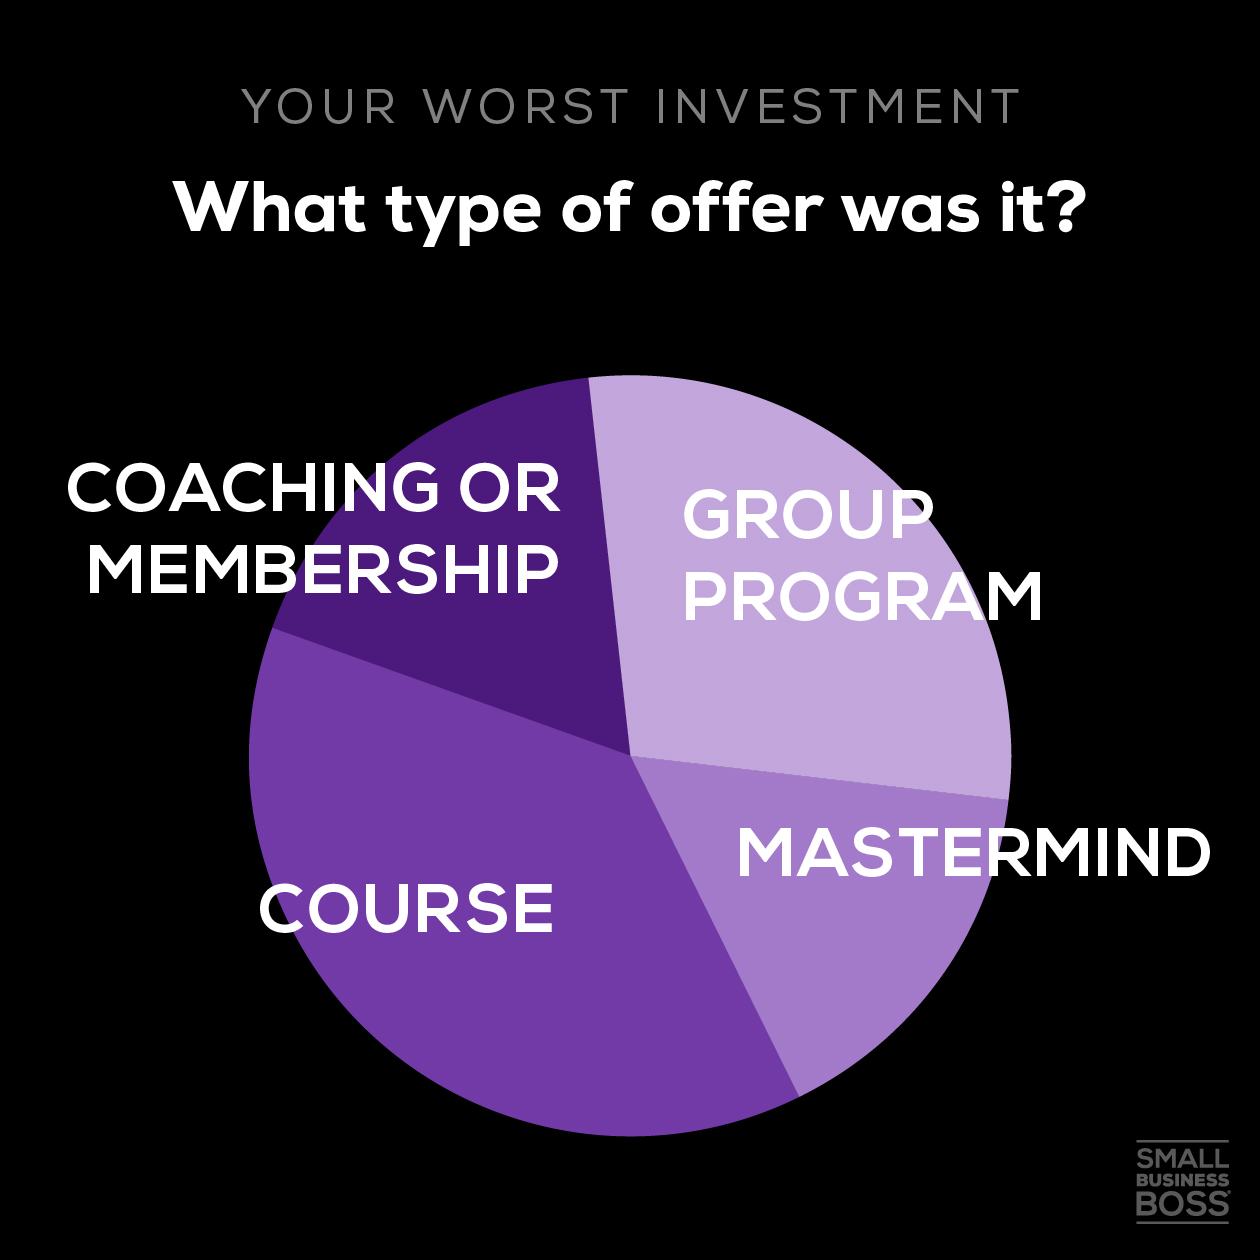 pie chart of the types of worst investment offers